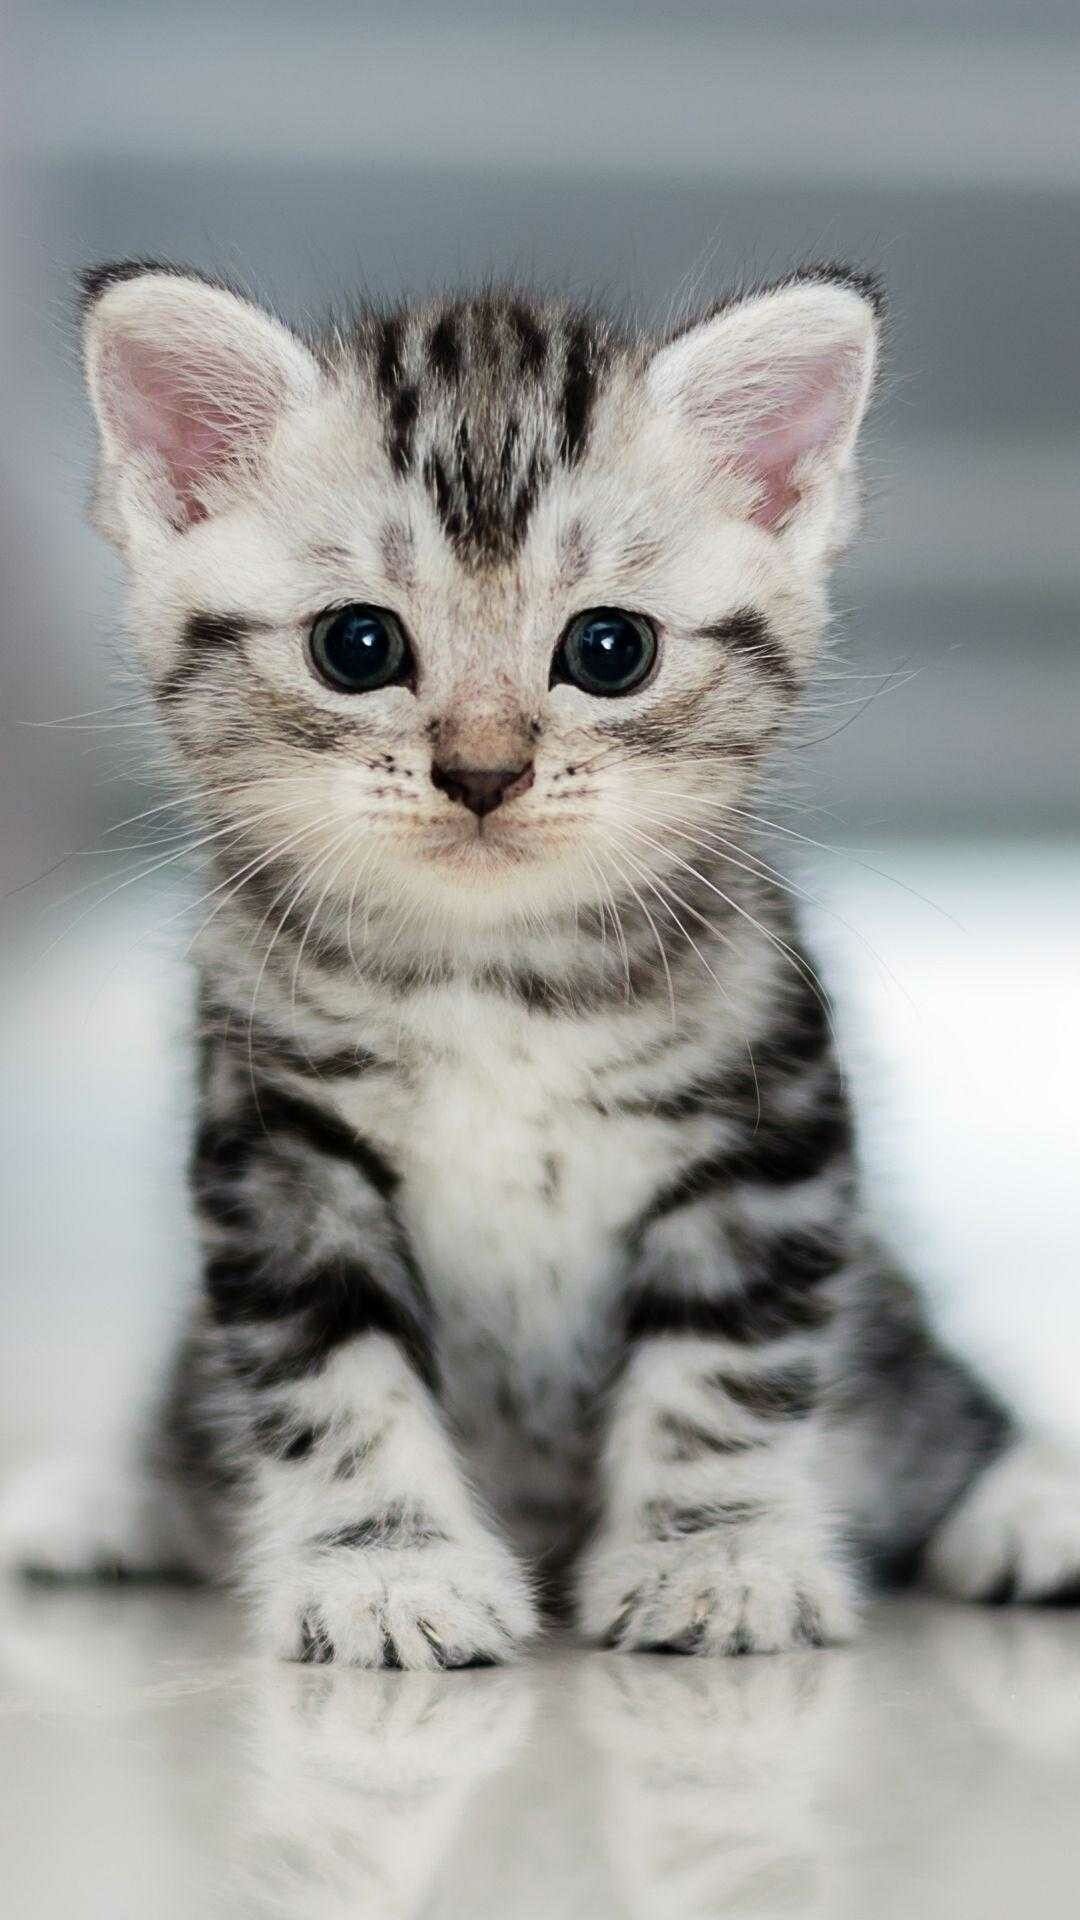 Cat, Cute and cuddly, Adorable innocence, Endearing charm, 1080x1920 Full HD Phone